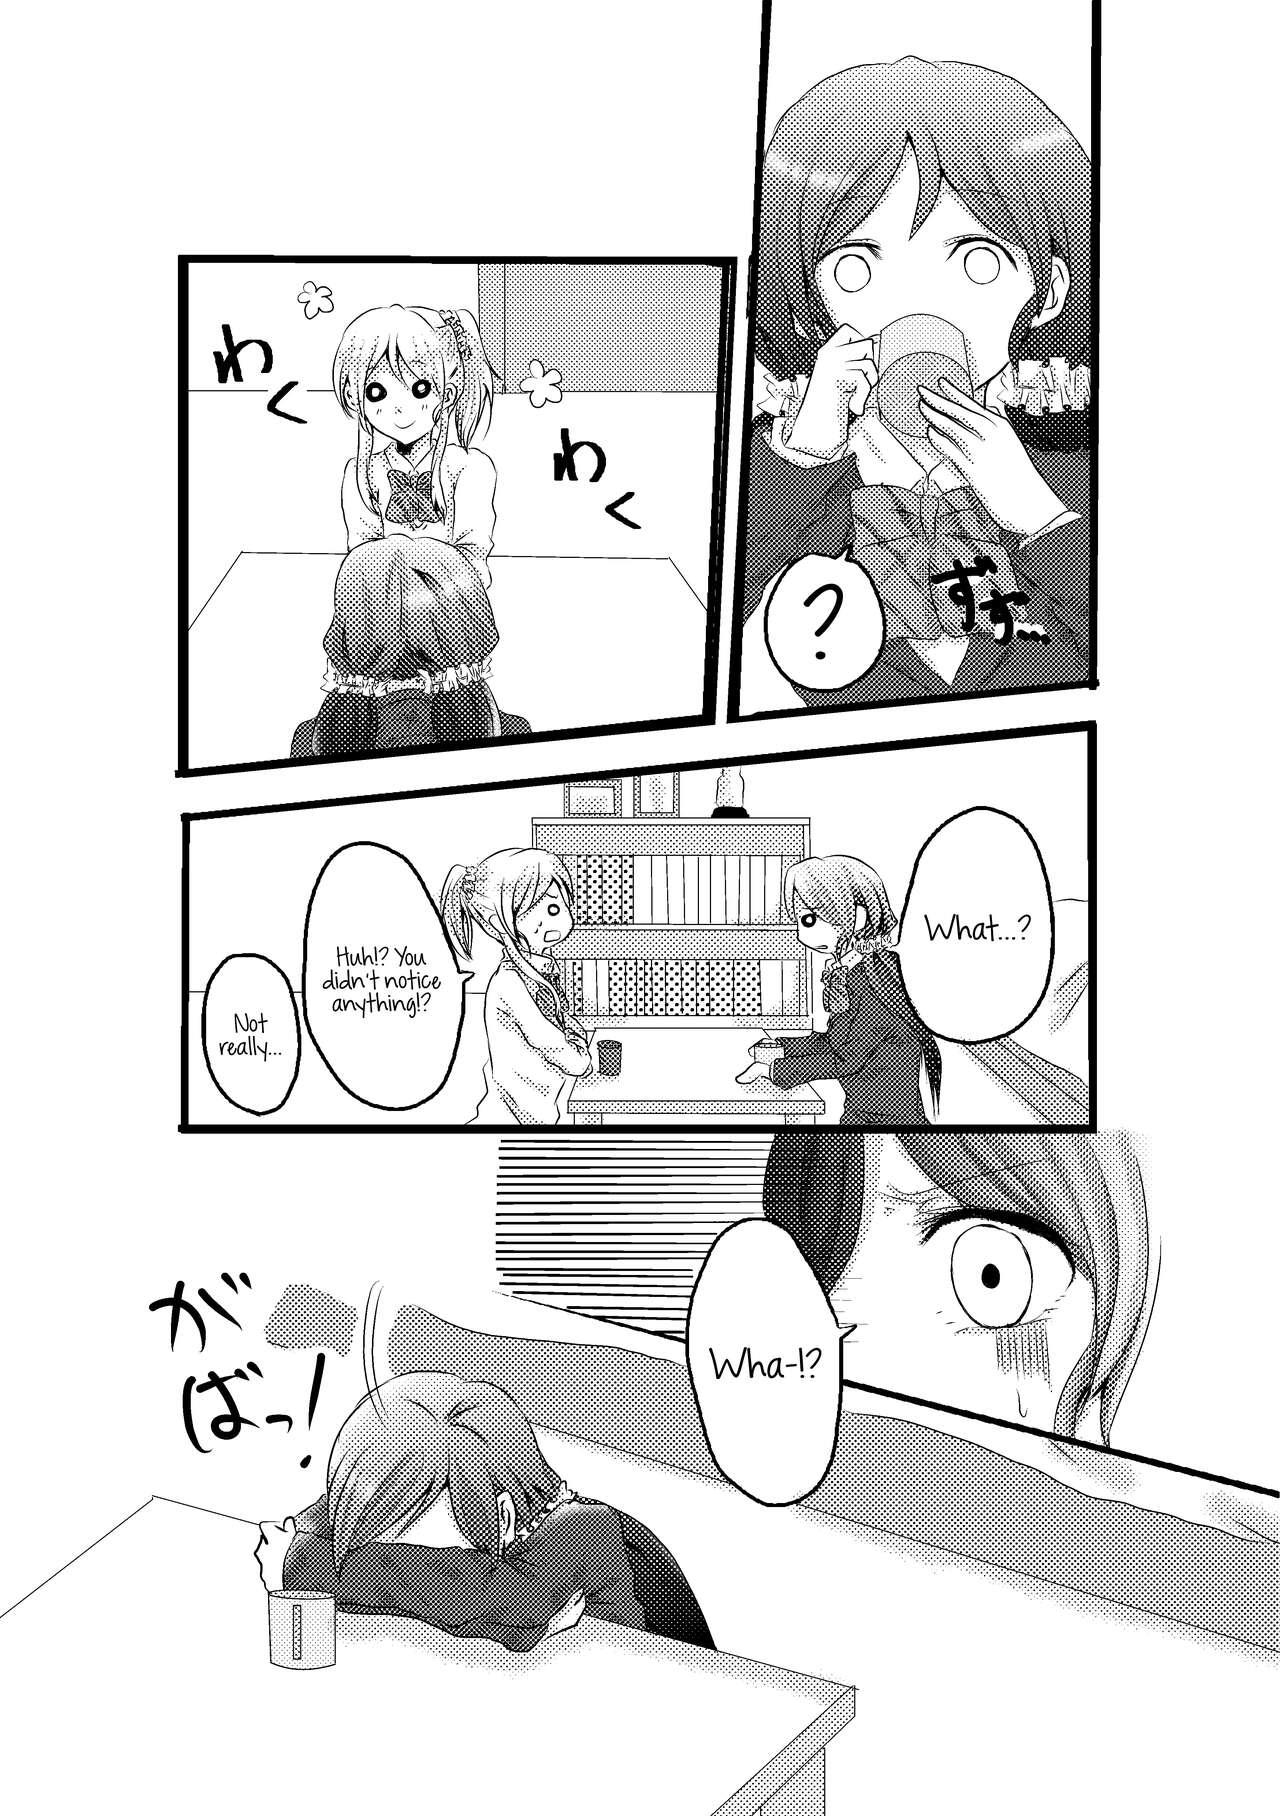 Trimmed [Inugoya (Toshiko)] A story about mischievous Eli-chan and Nozomi-chan (Umi no Shinwa) (Love Live!) [English] [Usr32] [Digital] - Love live Natural - Picture 2